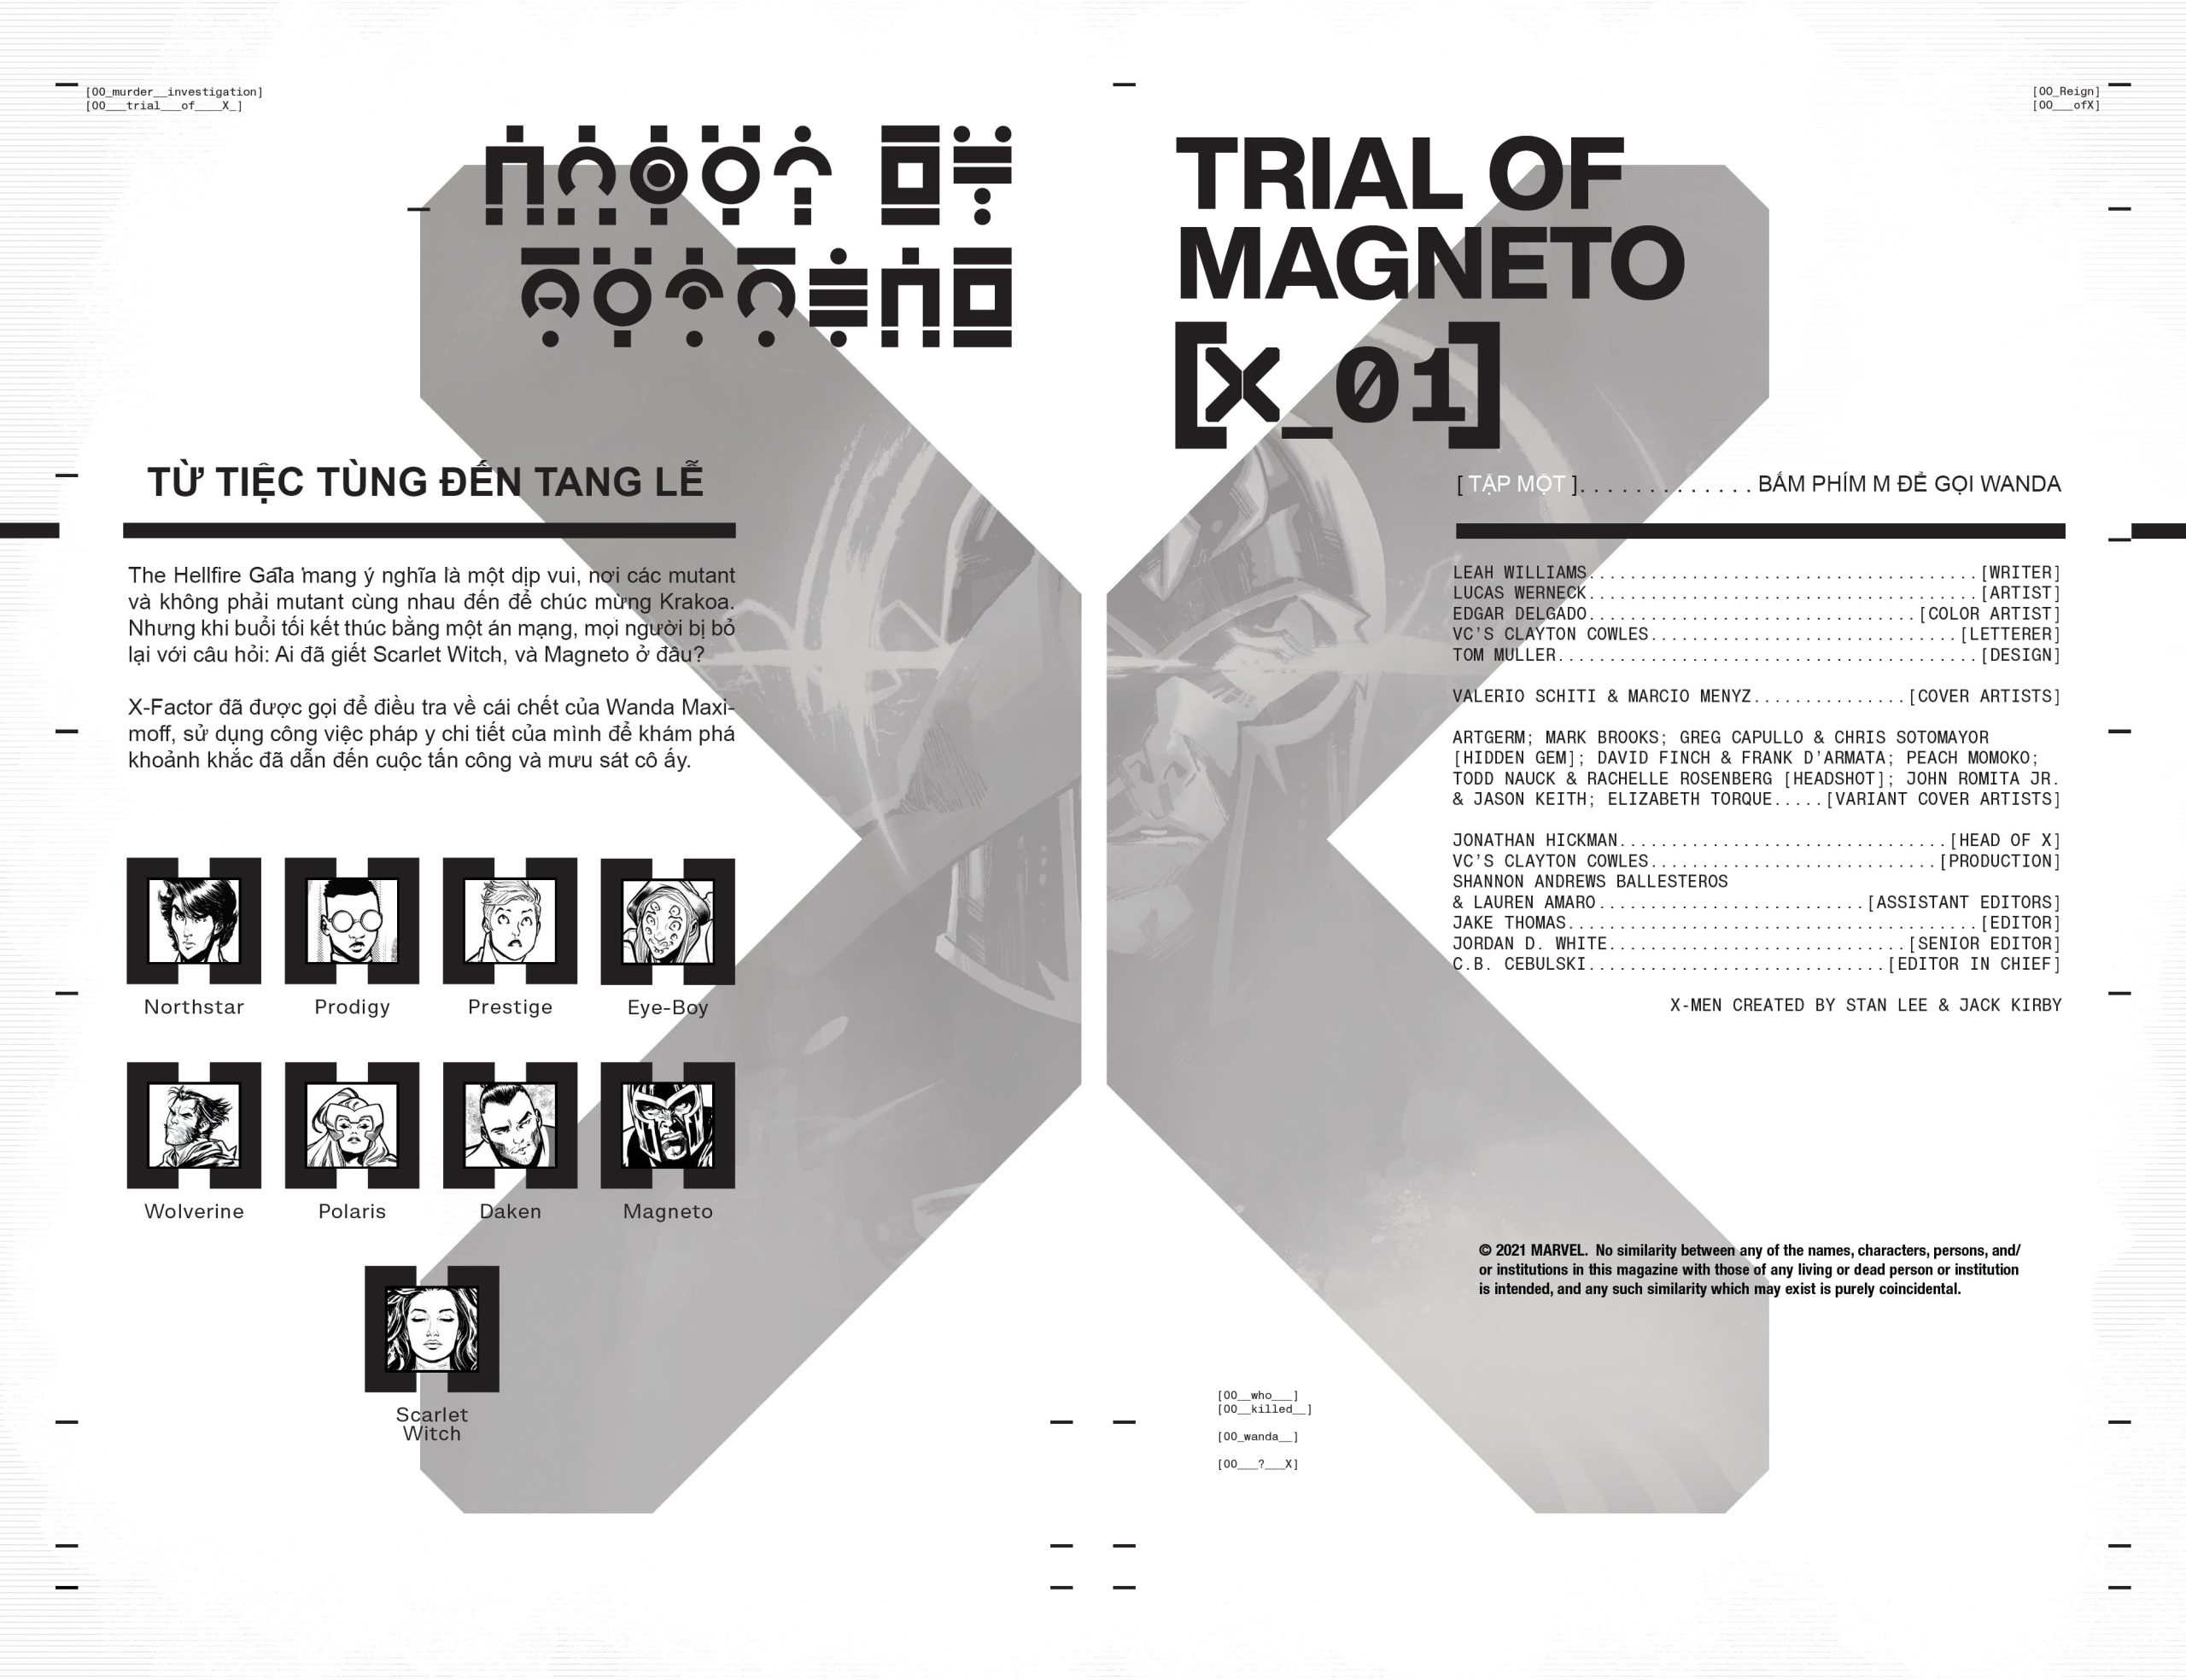 https://langgeek.net/wp-content/webpc-passthru.php?src=https://langgeek.net/wp-content/uploads/2022/03/X-Men-The-Trial-Of-Magneto-2021-01-of-05-002-scaled.jpg&nocache=1